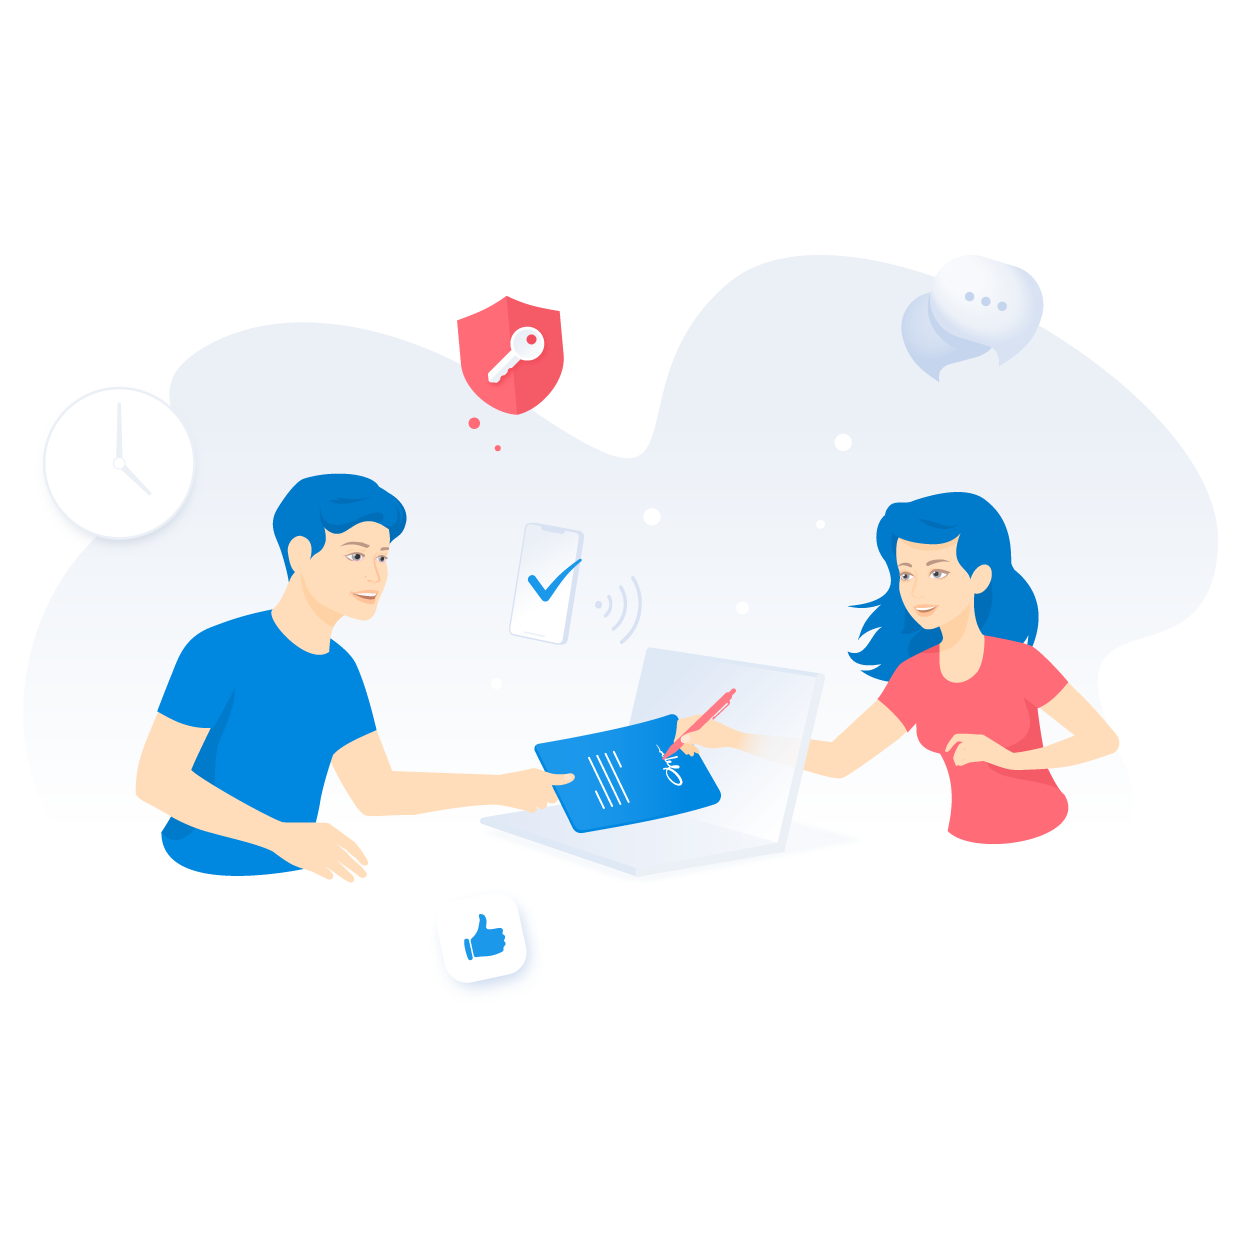 Illustration of man and woman signing a document in the cloud